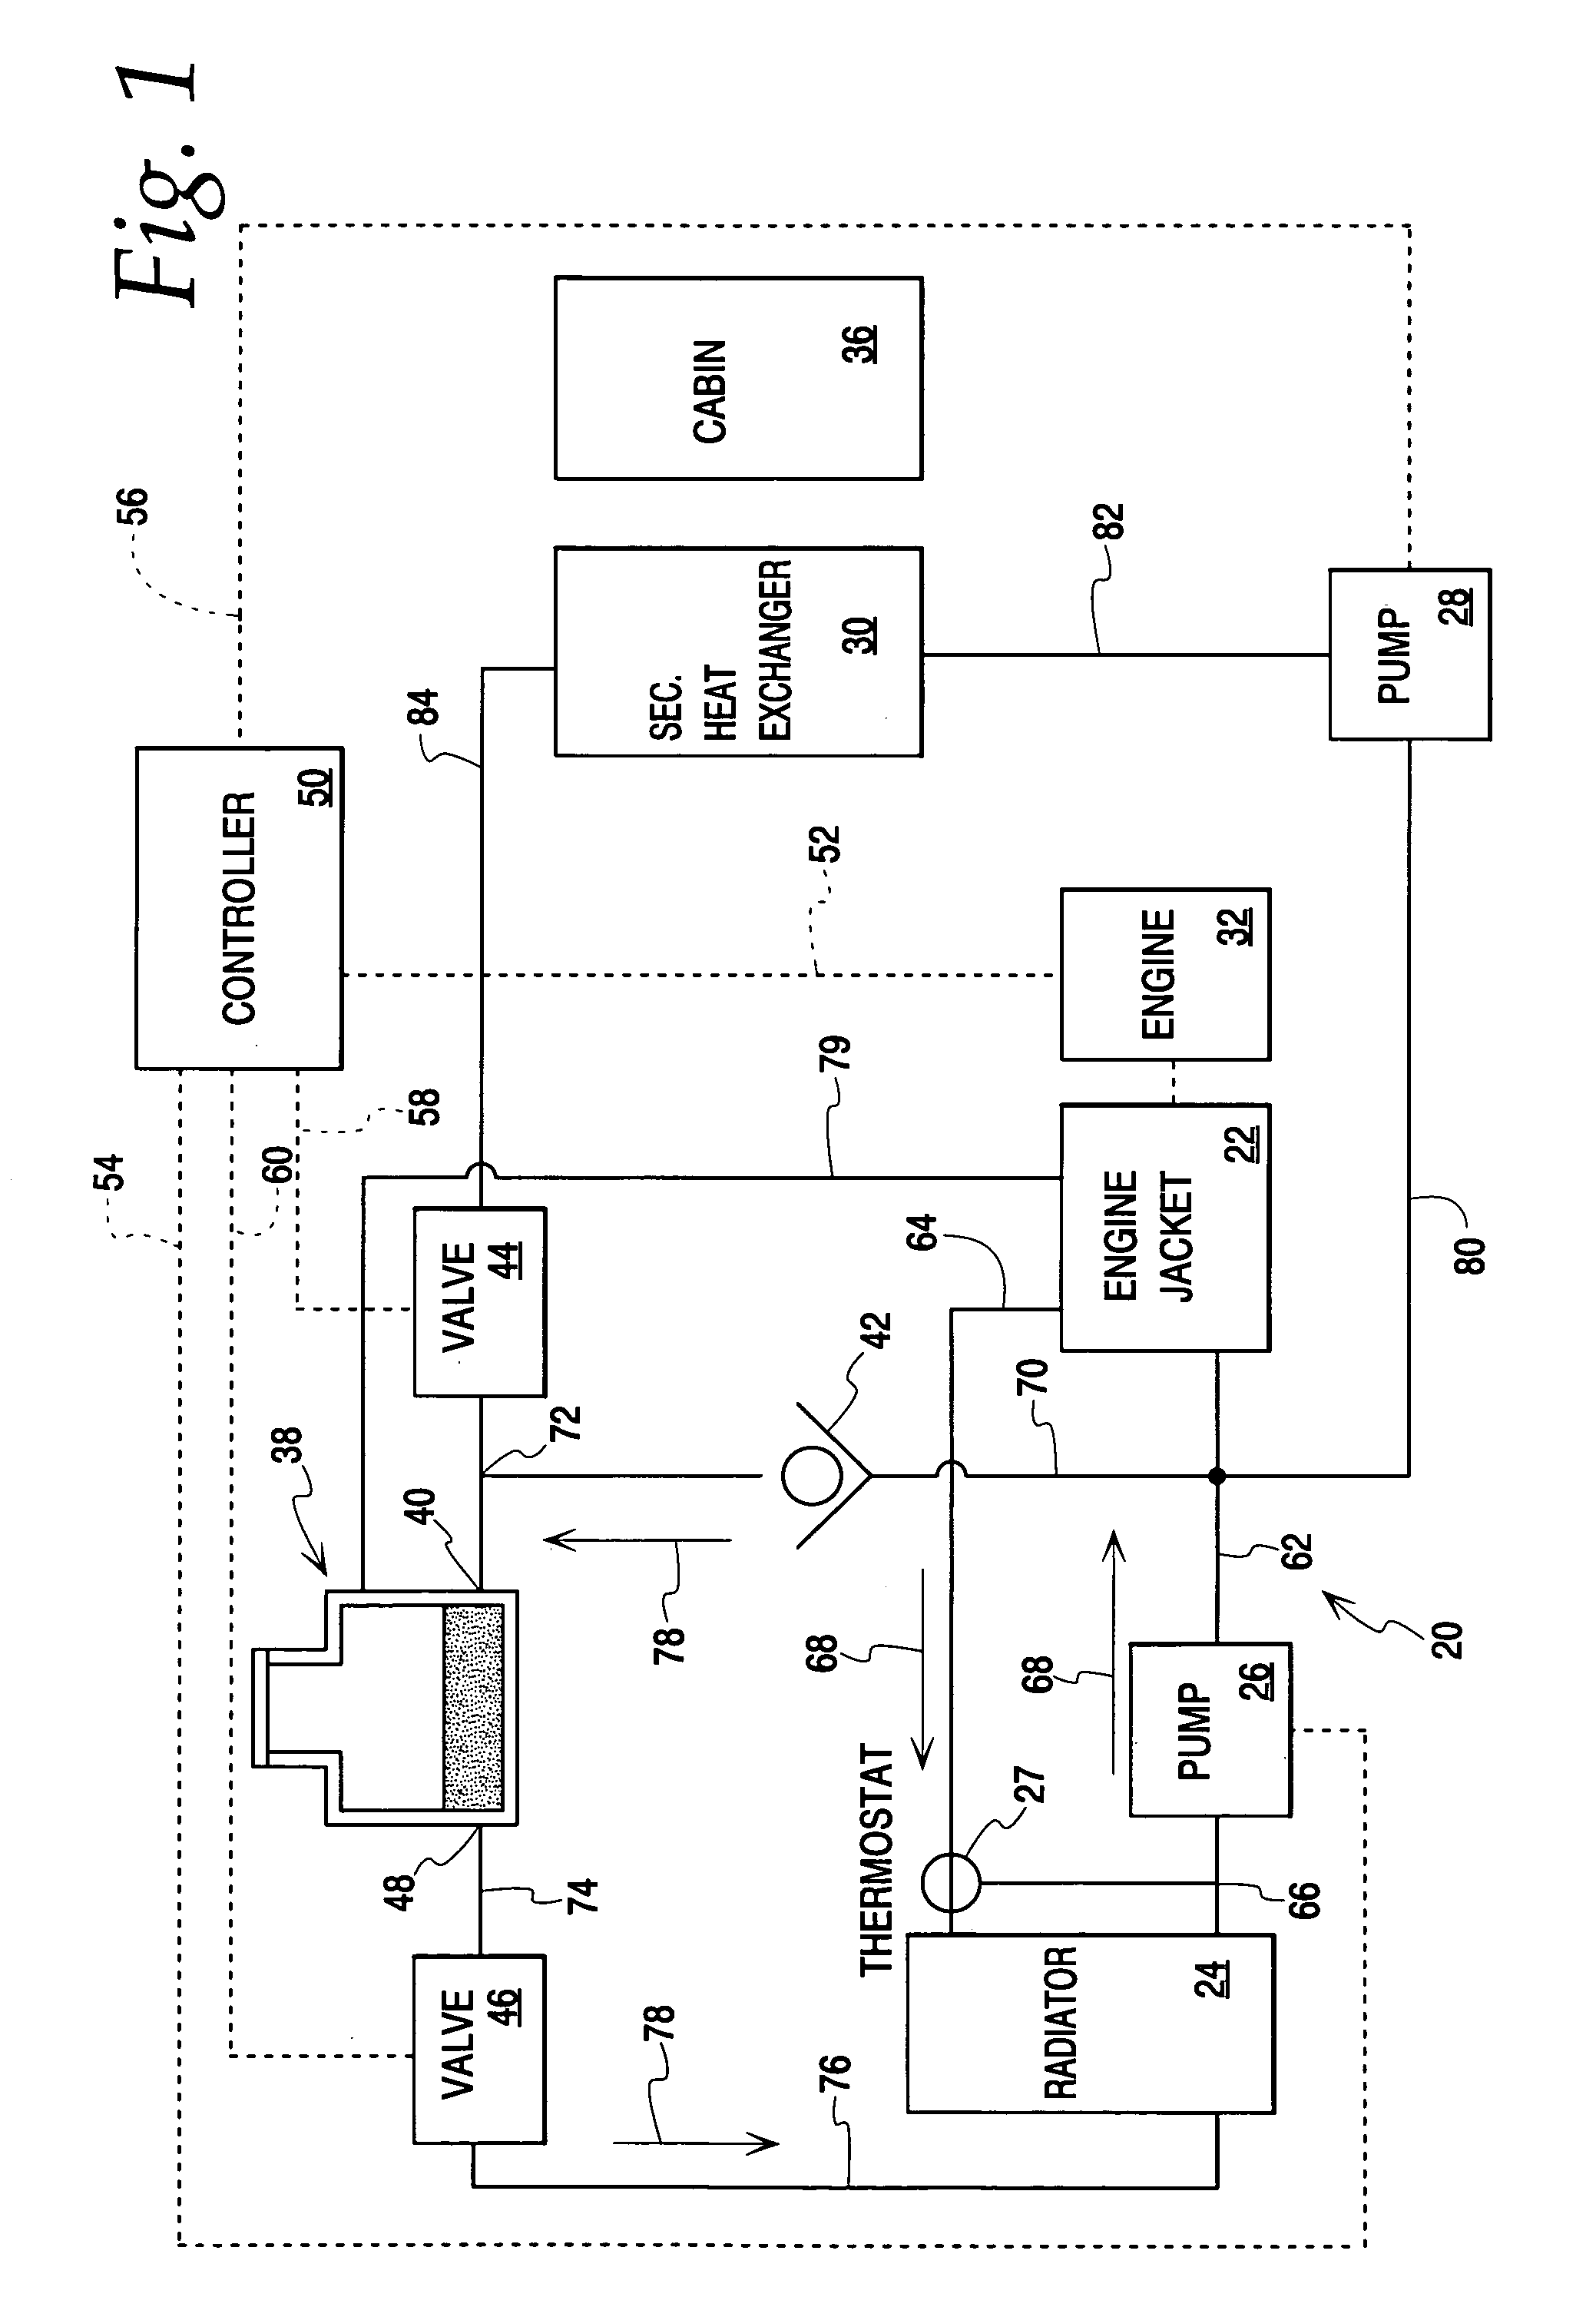 Coolant system with thermal energy storage and method of operating same